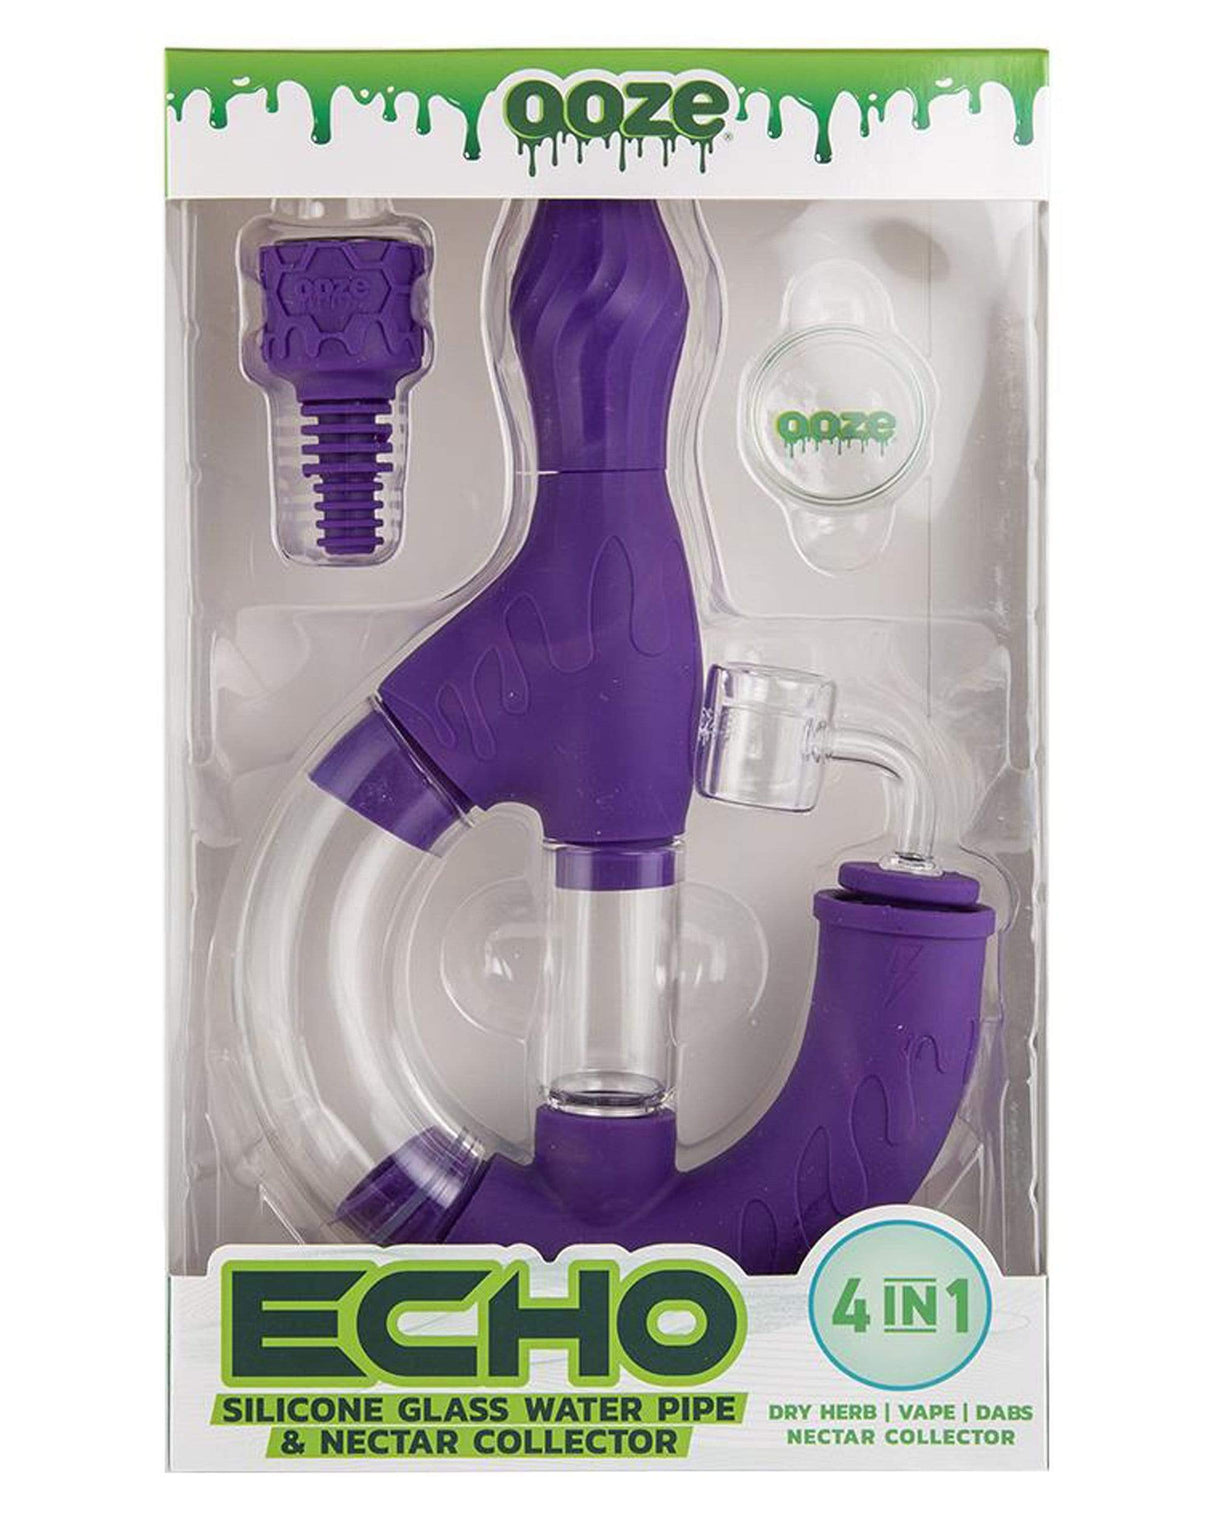 Ooze Echo 4-in-1 Silicone Bong in Purple, Front View with Packaging, Versatile for Dry Herbs and Concentrates